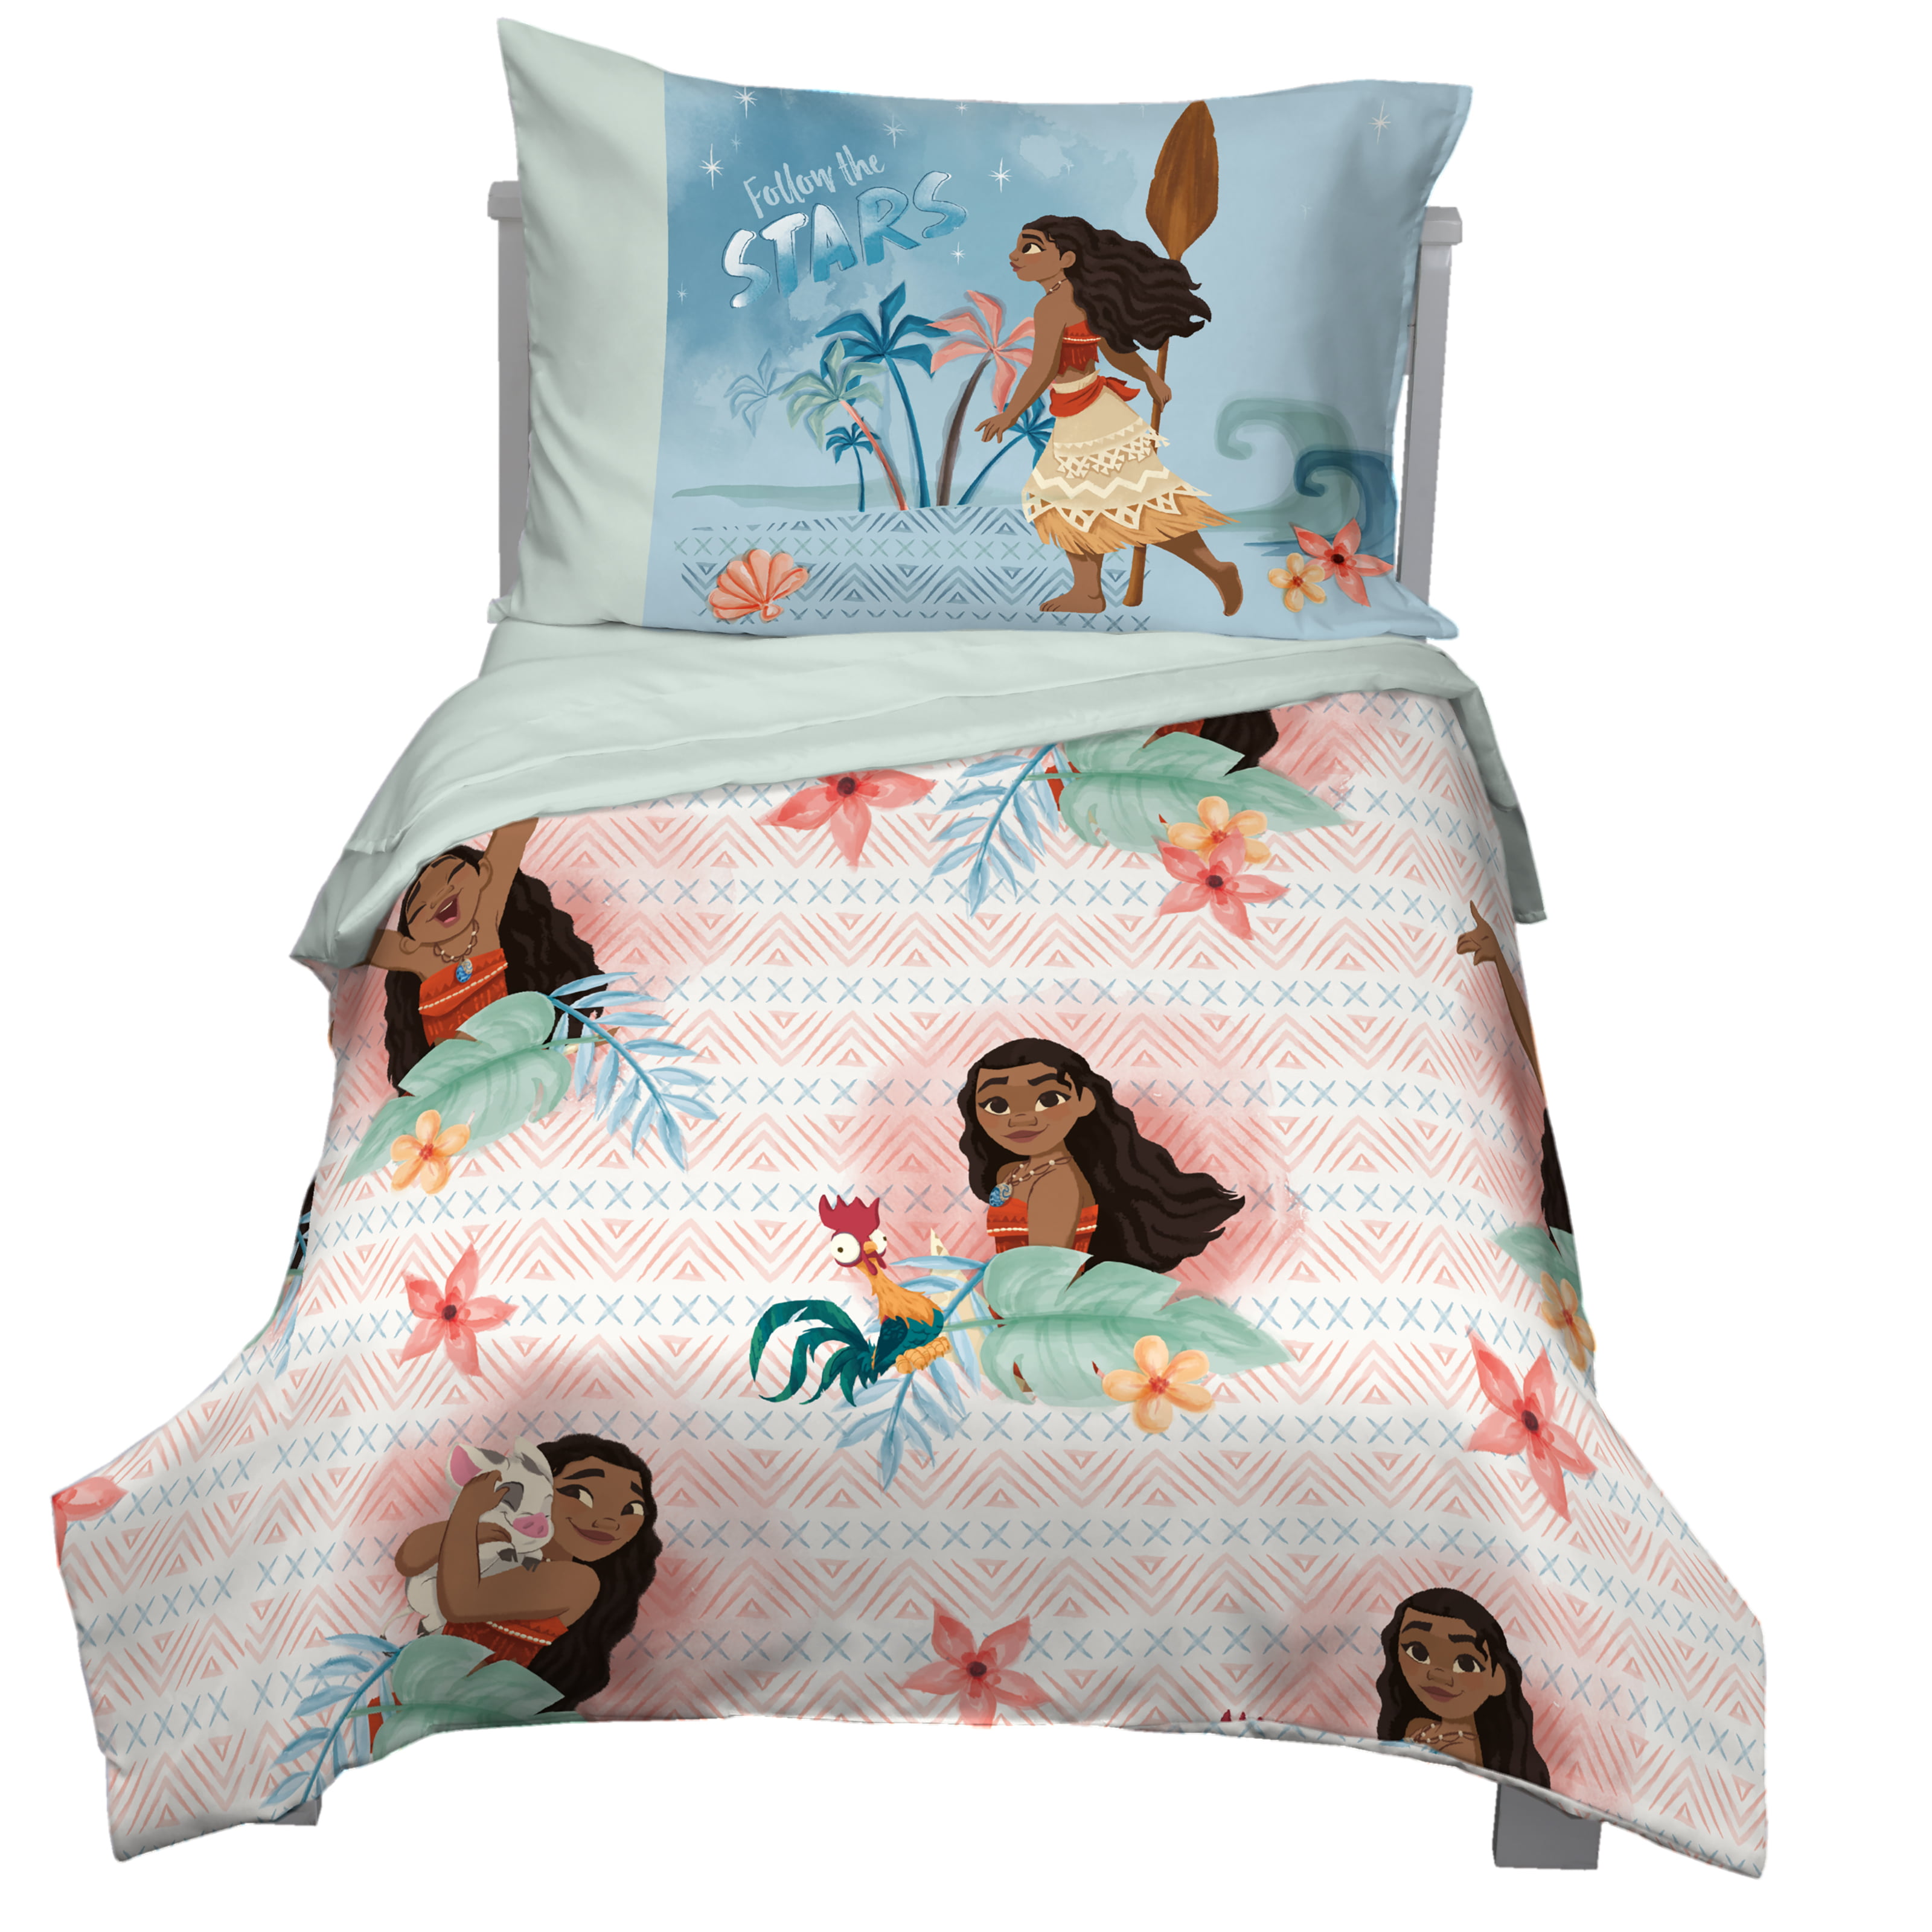 Disney Frozen II Toddler Bedding Set 3 PC-Comforter Fitted Sheet and Pillowcase 